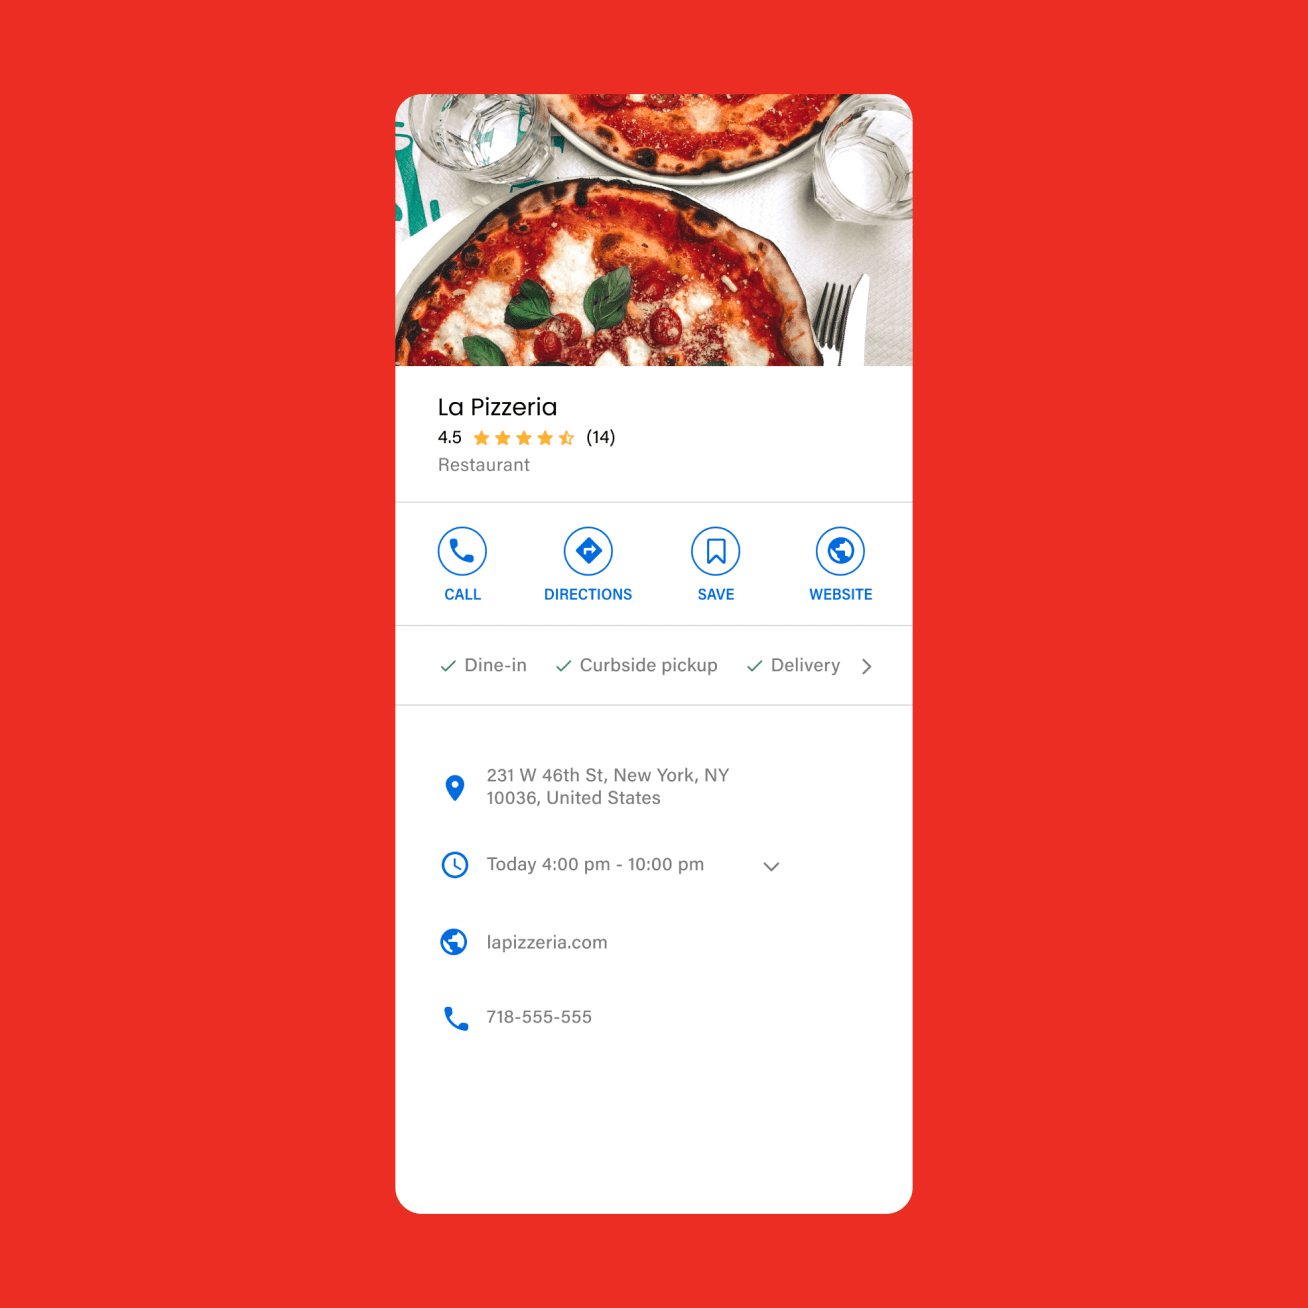 Cellphone screen showing a search result for a pizza restaurant in Google business profile